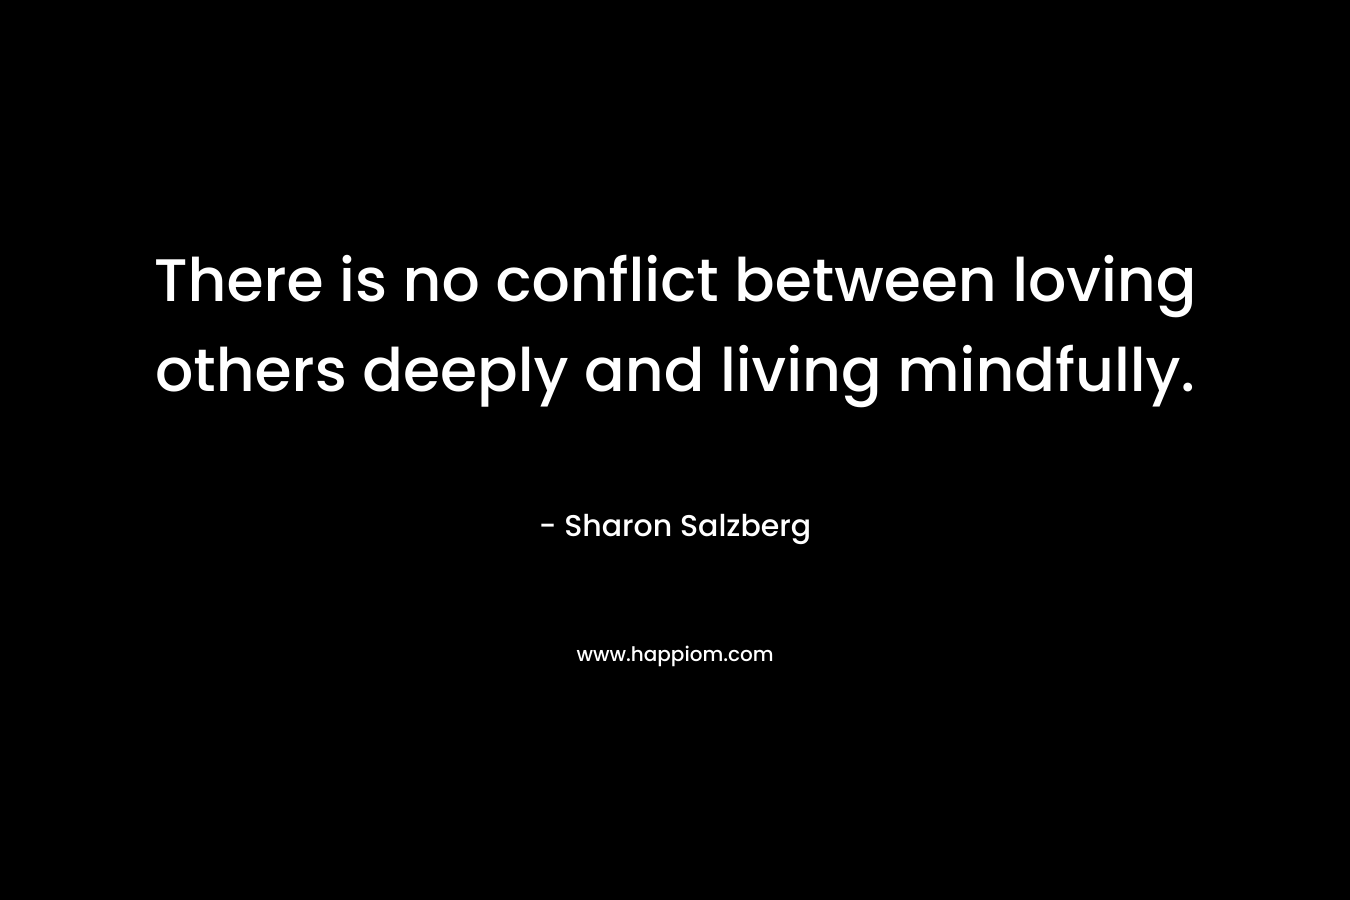 There is no conflict between loving others deeply and living mindfully.